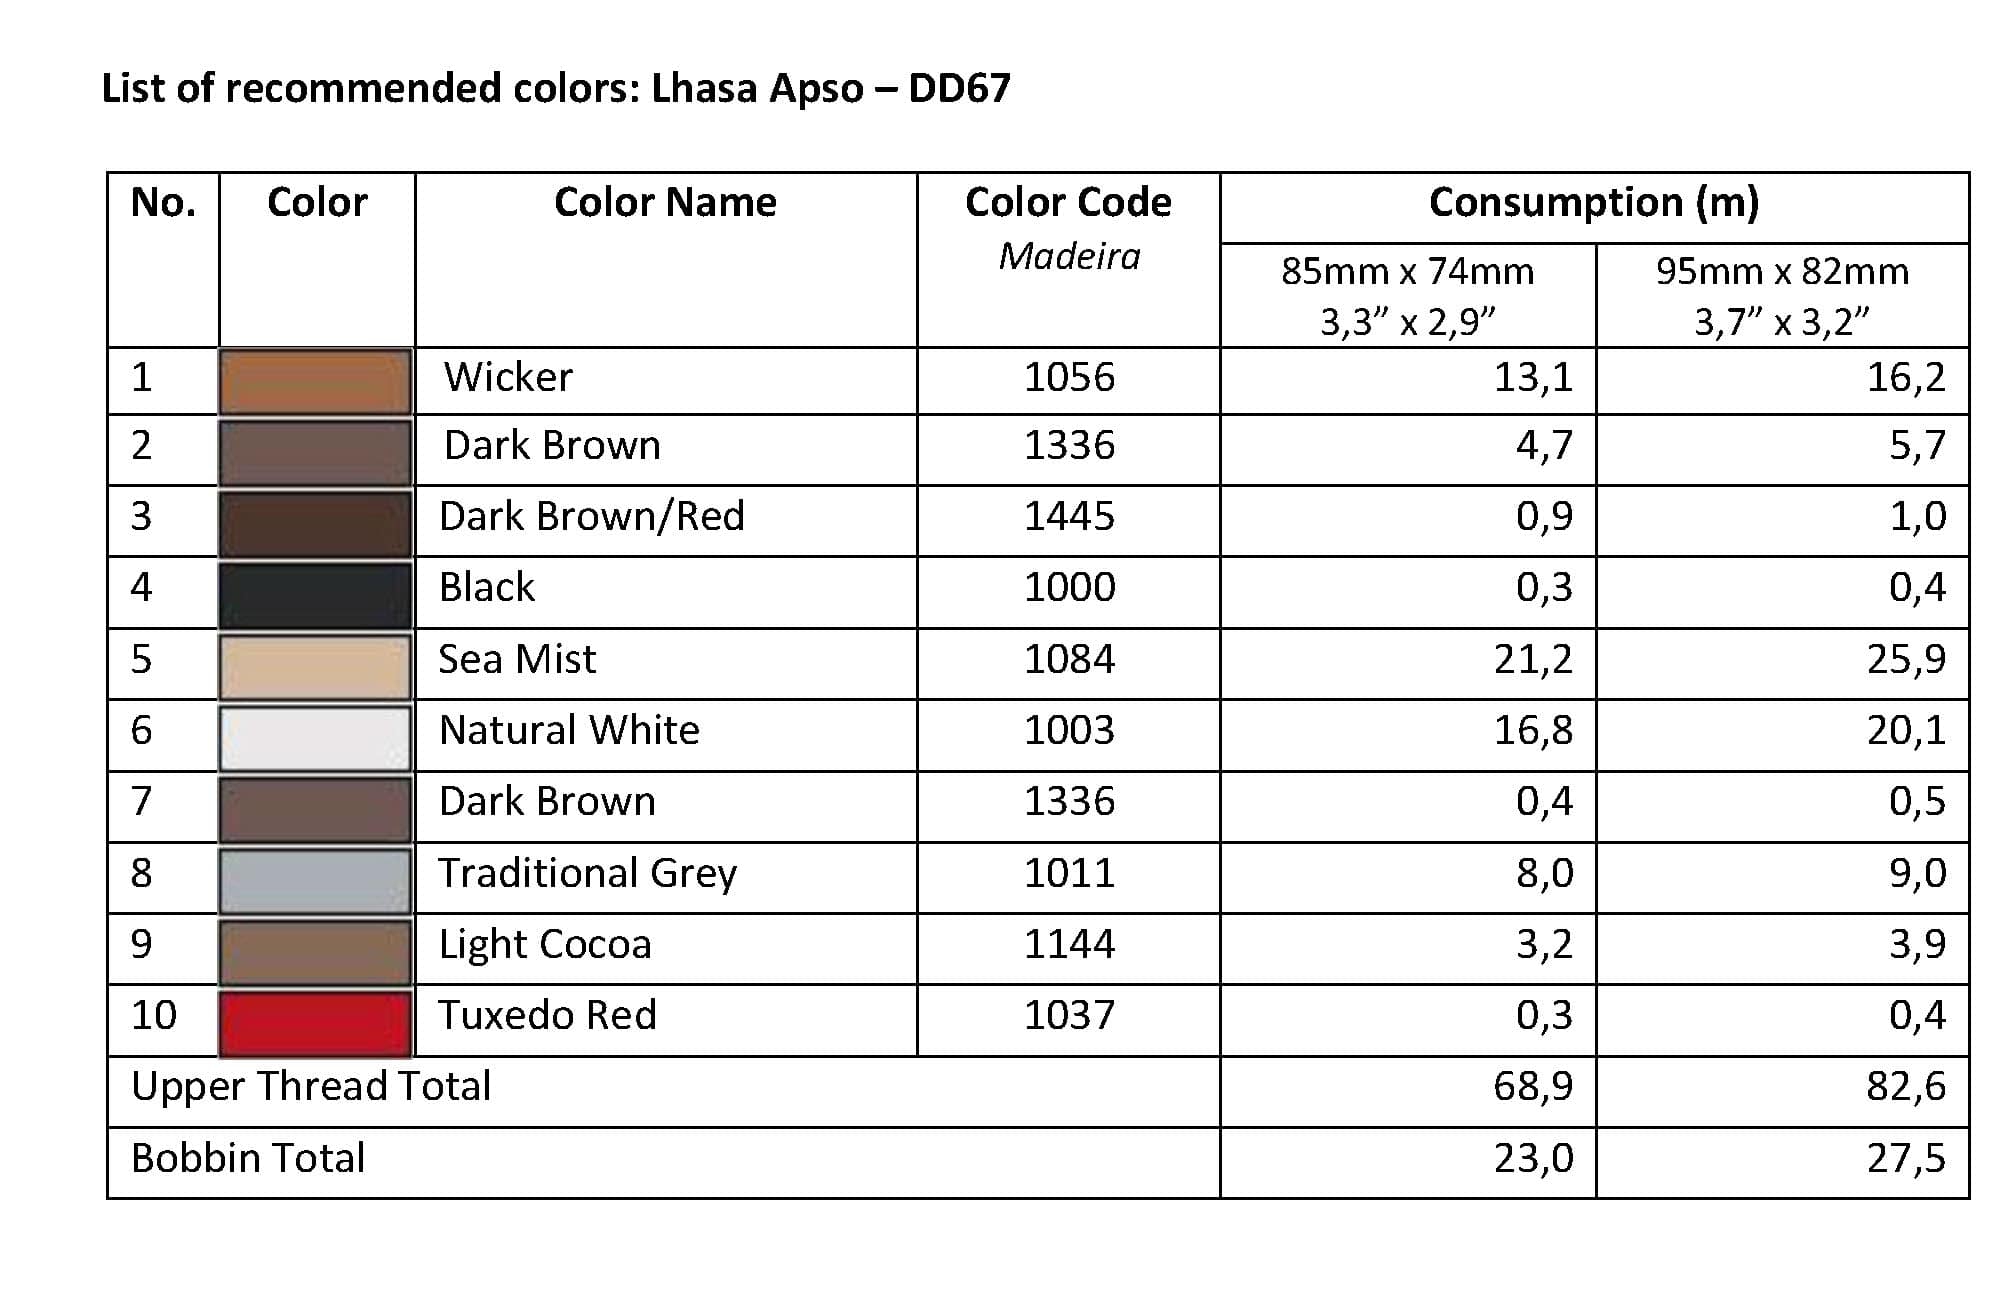 List of Recommended Colors - Lhasa Apso DD67